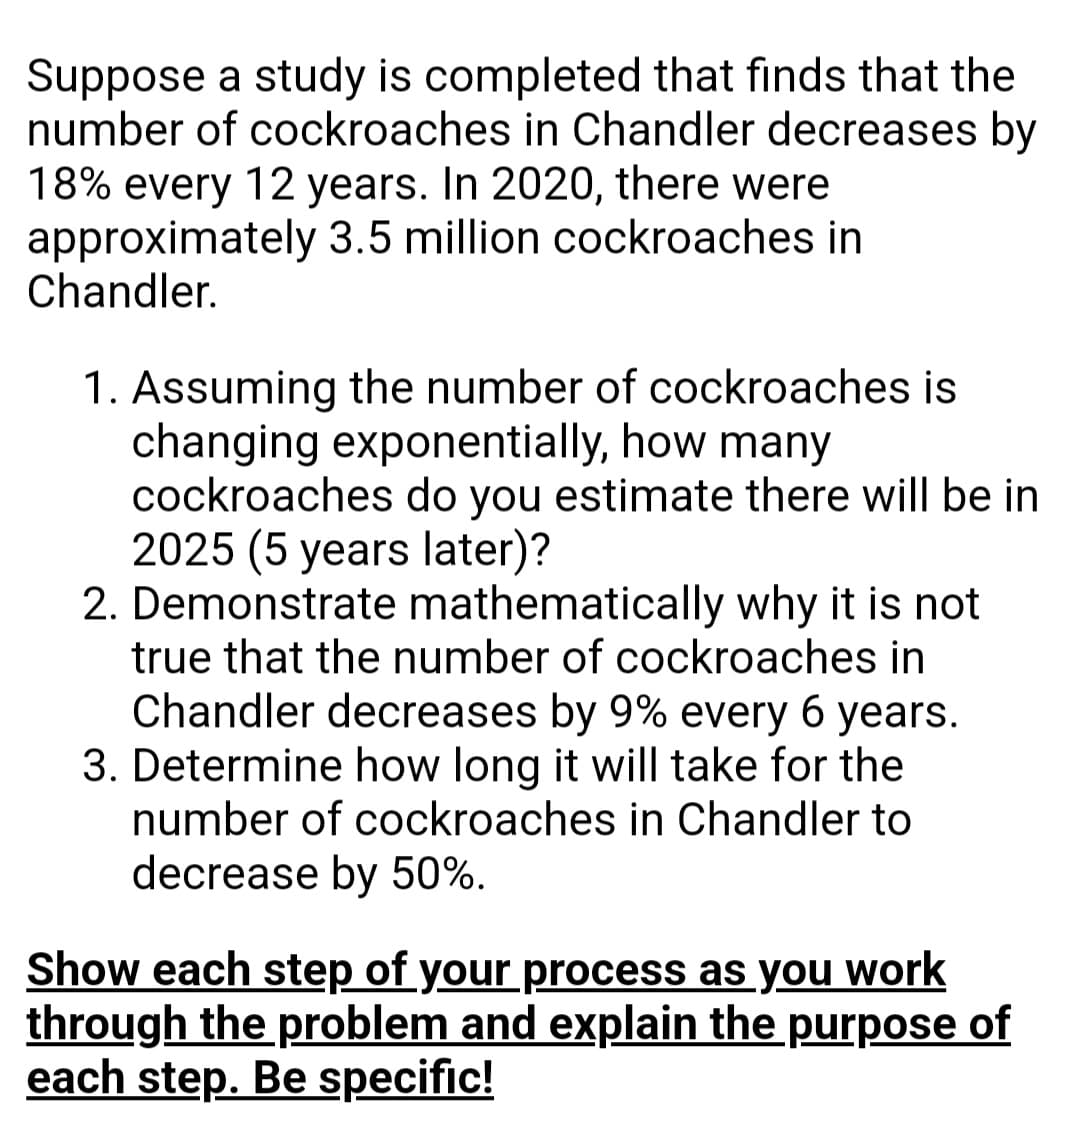 Suppose a study is completed that finds that the
number of cockroaches in Chandler decreases by
18% every 12 years. In 2020, there were
approximately 3.5 million cockroaches in
Chandler.
1. Assuming the number of cockroaches is
changing exponentially, how many
cockroaches do you estimate there will be in
2025 (5 years later)?
2. Demonstrate mathematically why it is not
true that the number of cockroaches in
Chandler decreases by 9% every 6 years.
3. Determine how long it will take for the
number of cockroaches in Chandler to
decrease by 50%.
Show each step of your process as you work
through the problem and explain the purpose of
each step. Be specific!
